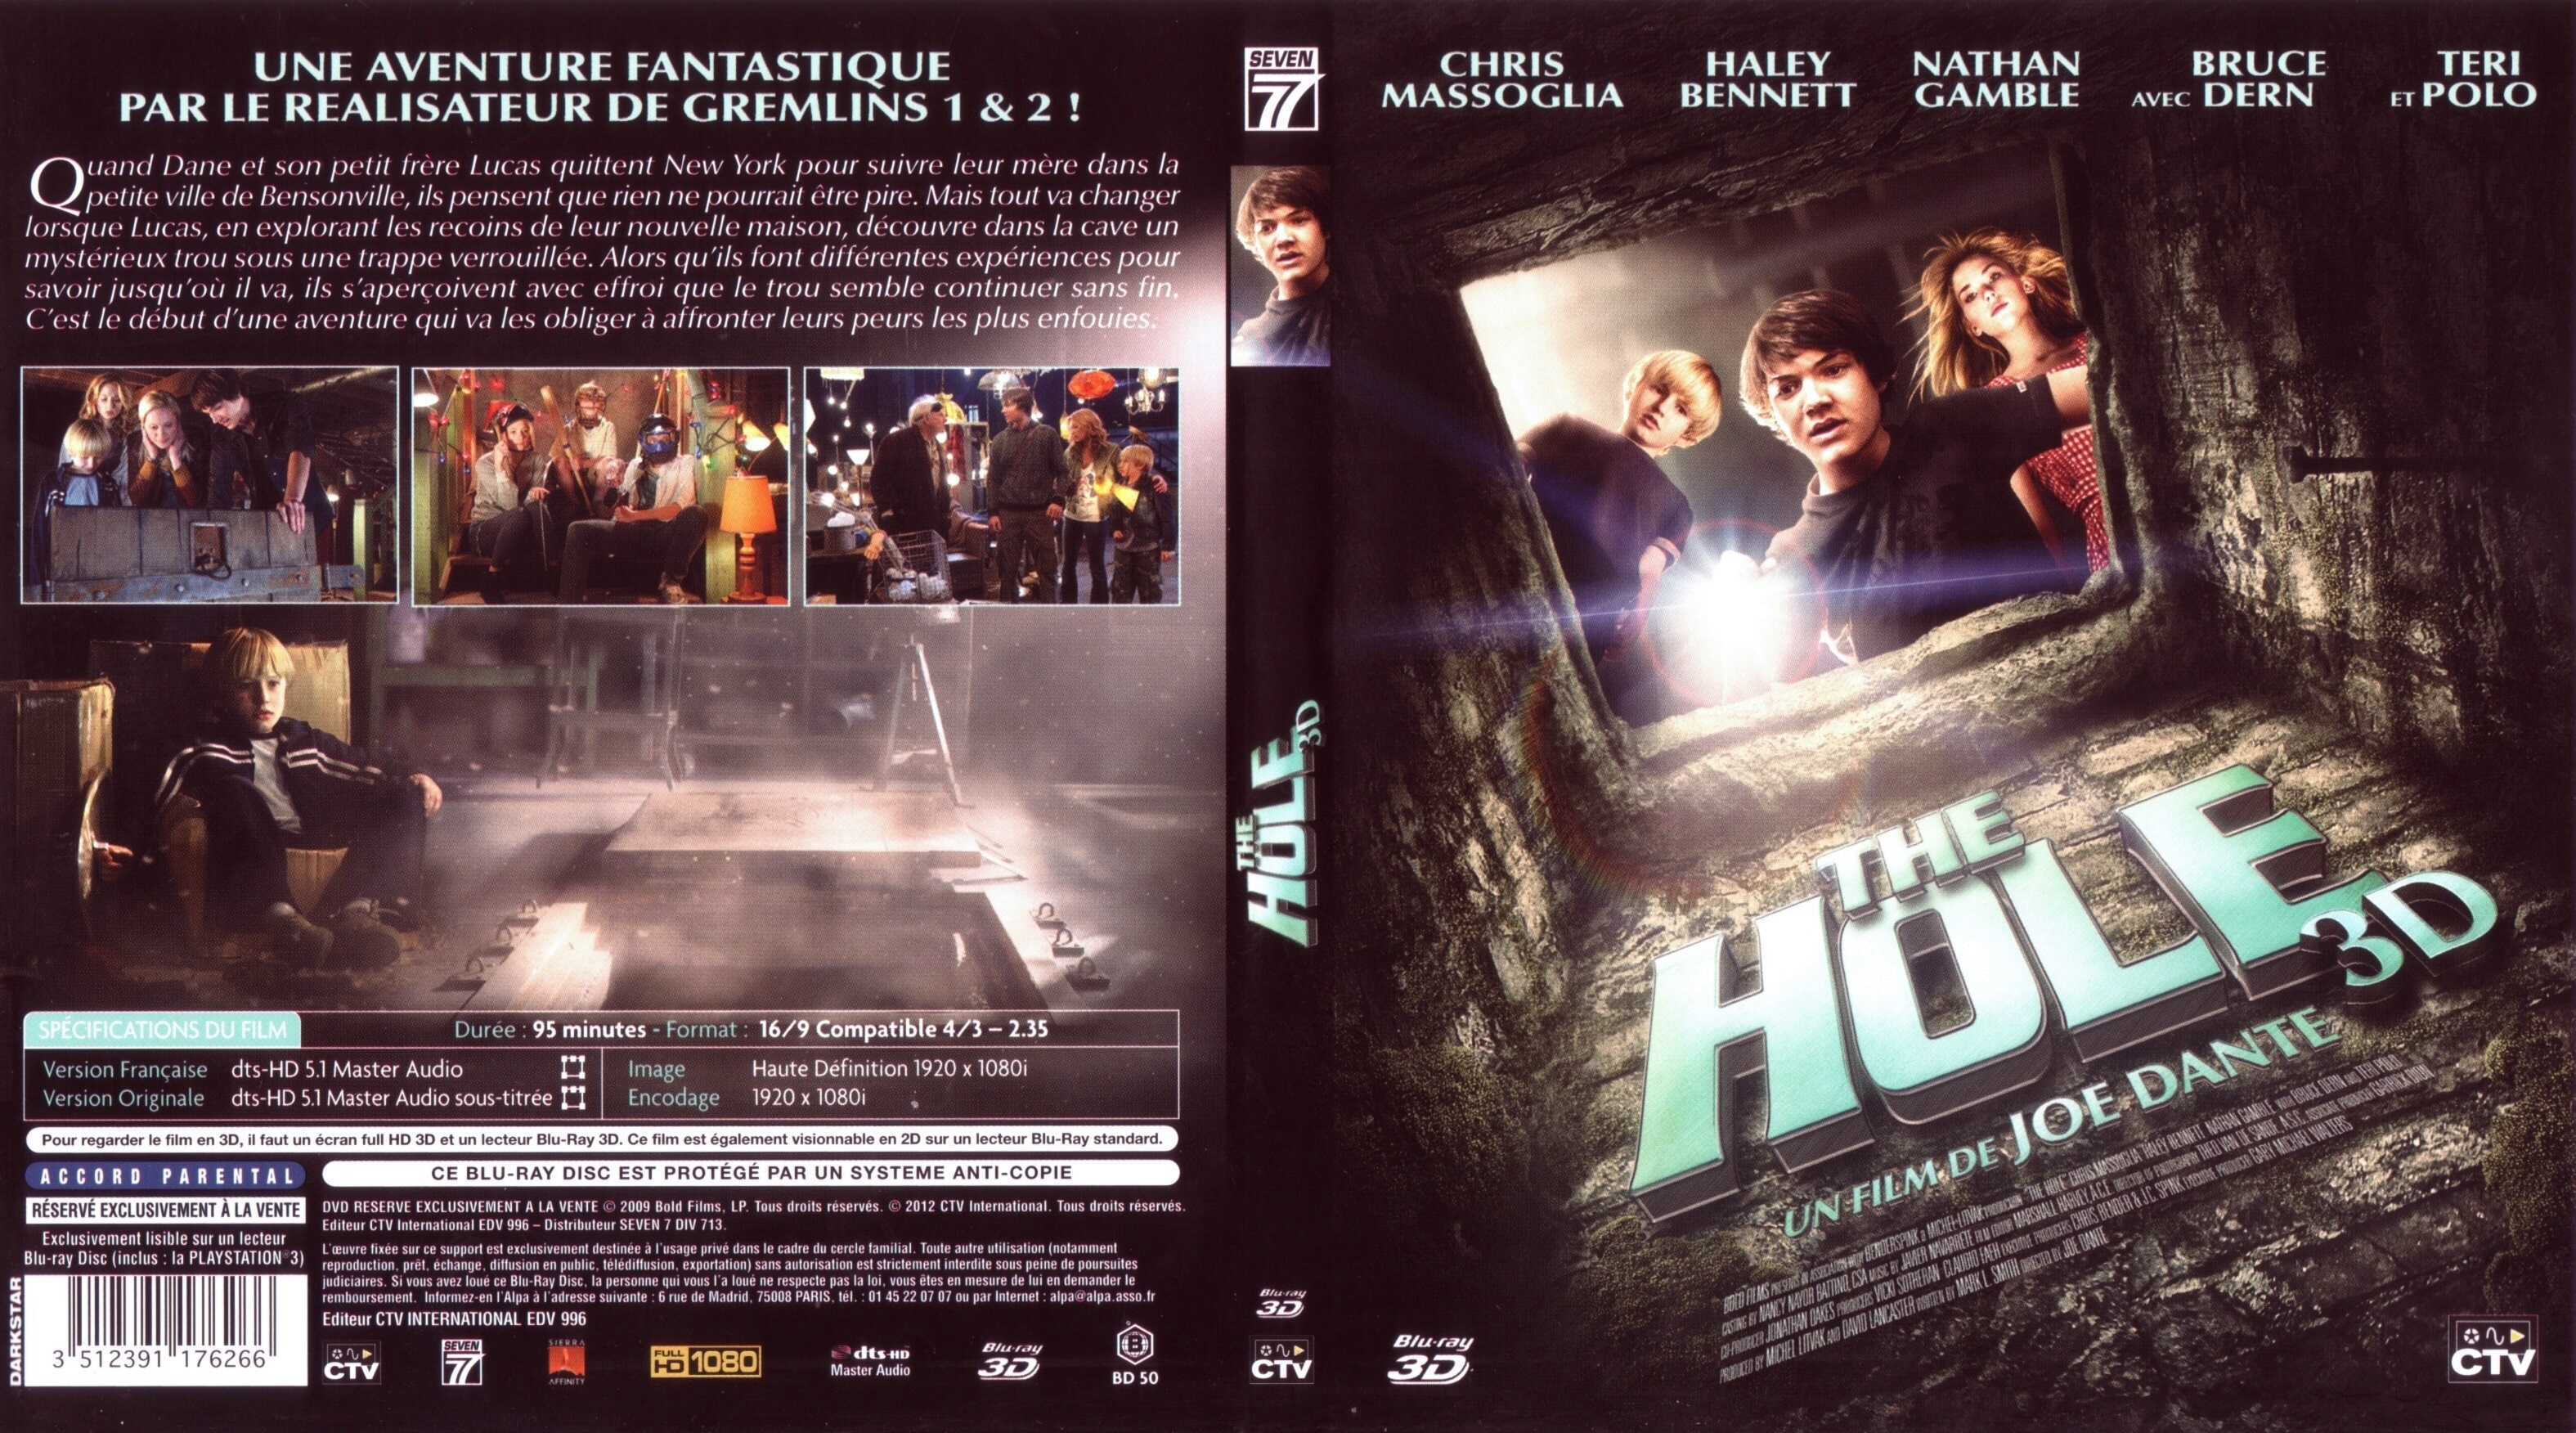 Jaquette DVD The hole (2009) (BLU-RAY)